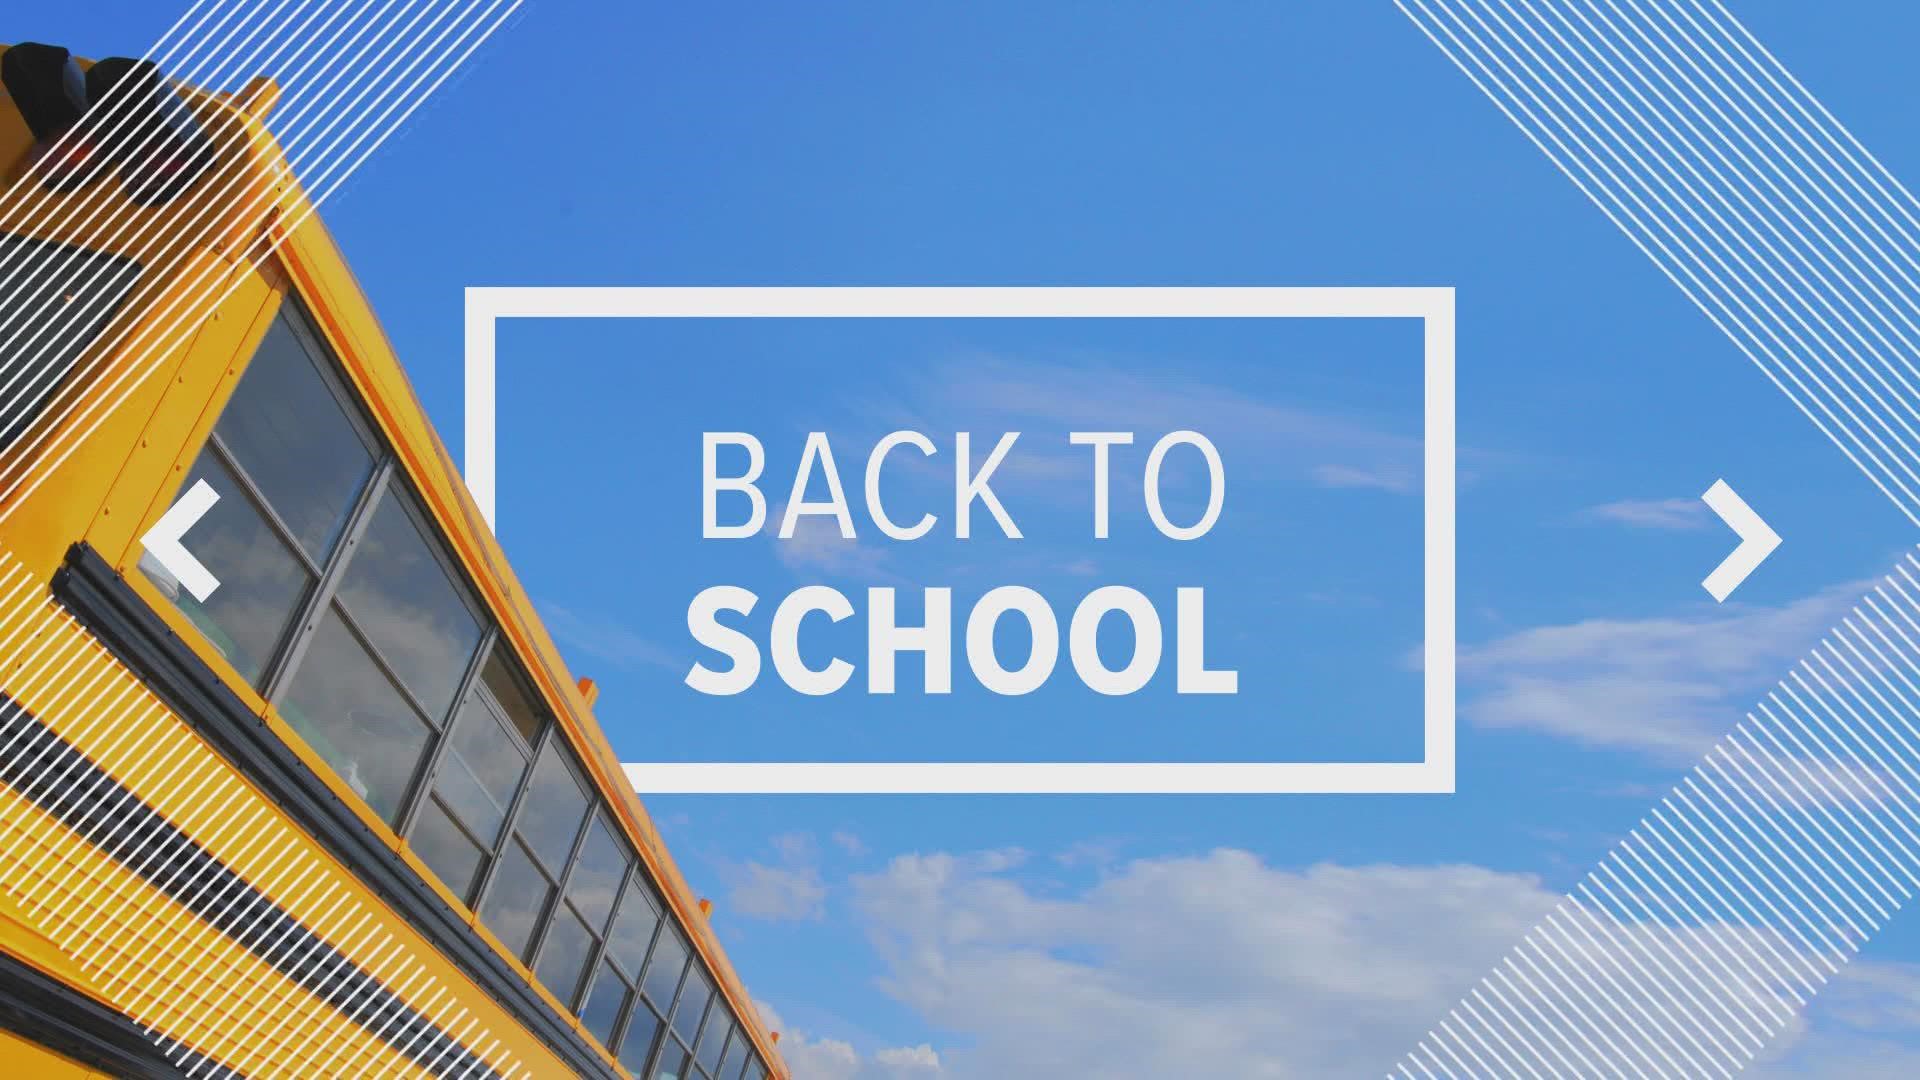 August is here and students will return to classrooms soon. You can start preparing now.